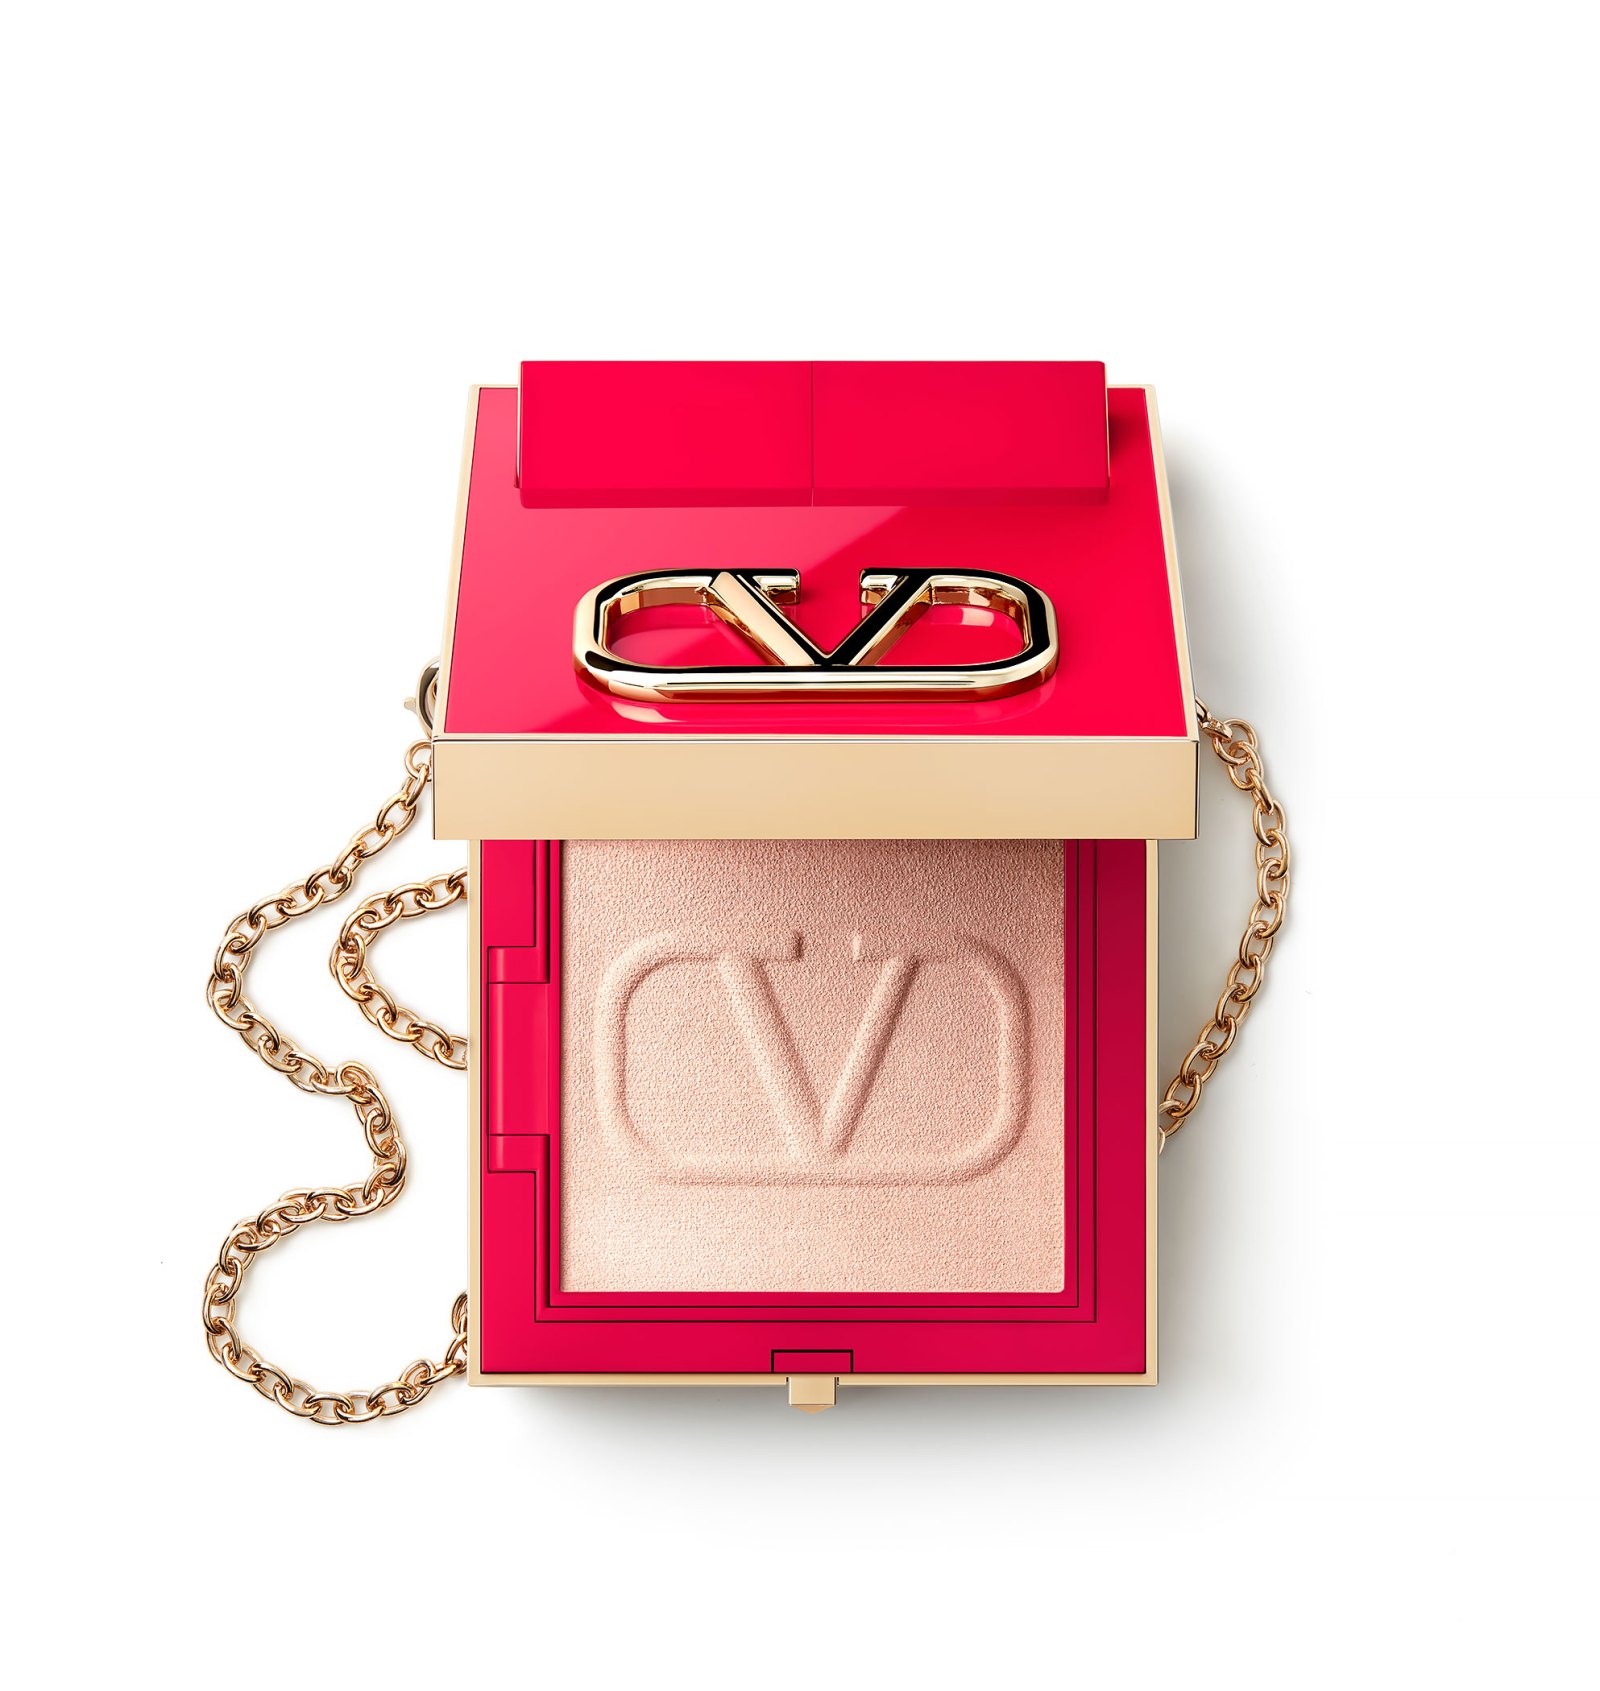 Everything to Know About Valentino’s New Makeup Collection